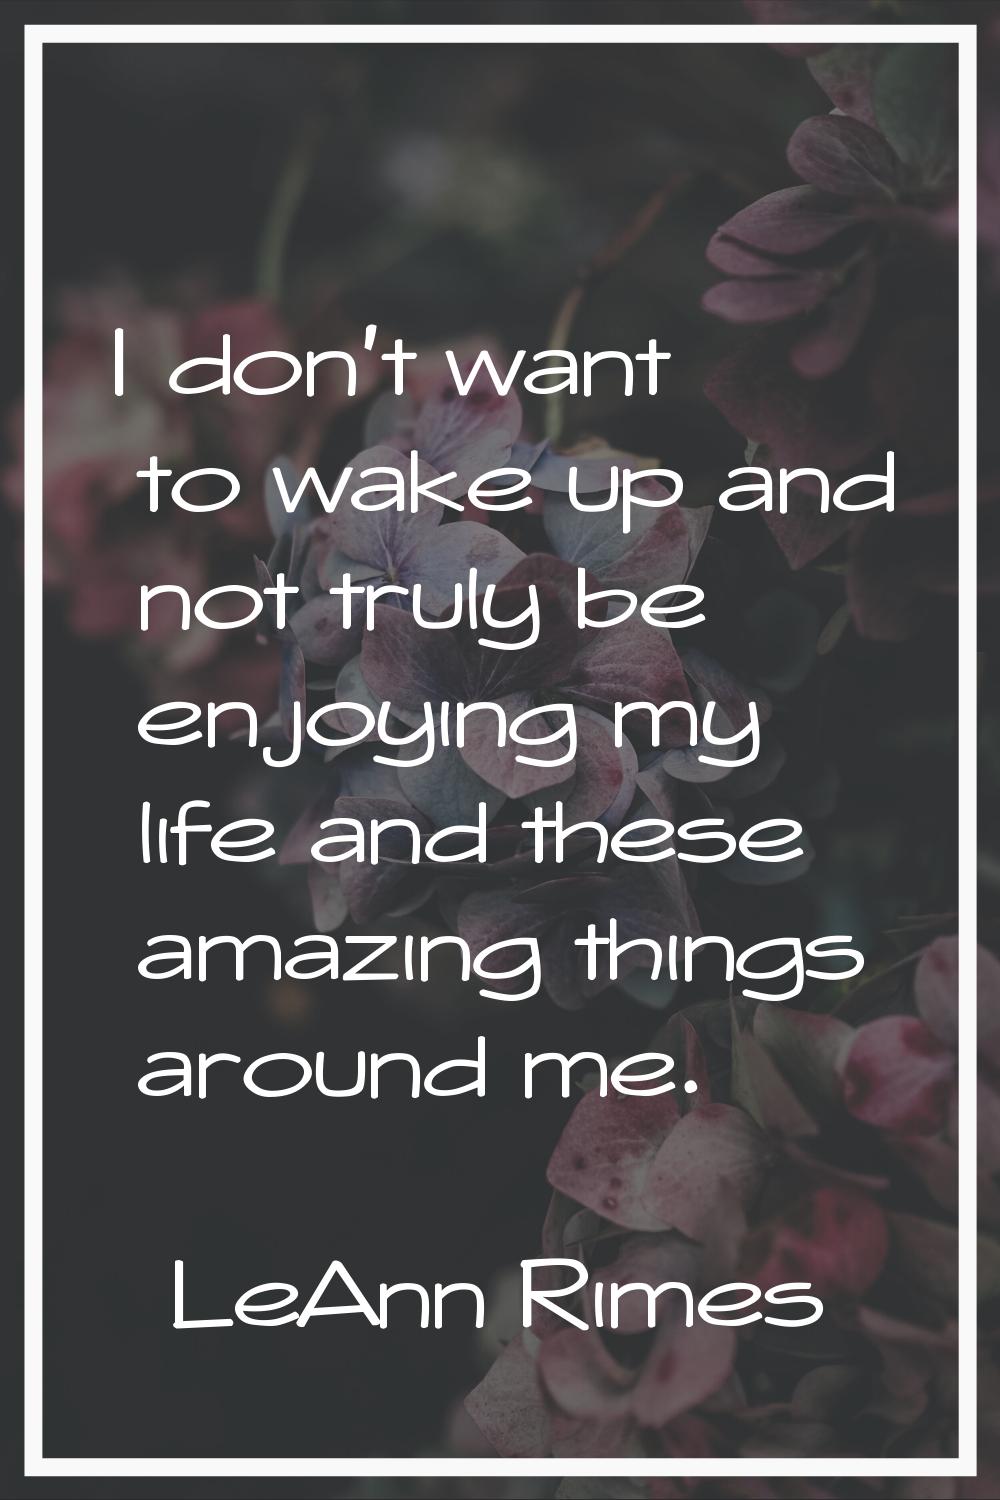 I don't want to wake up and not truly be enjoying my life and these amazing things around me.